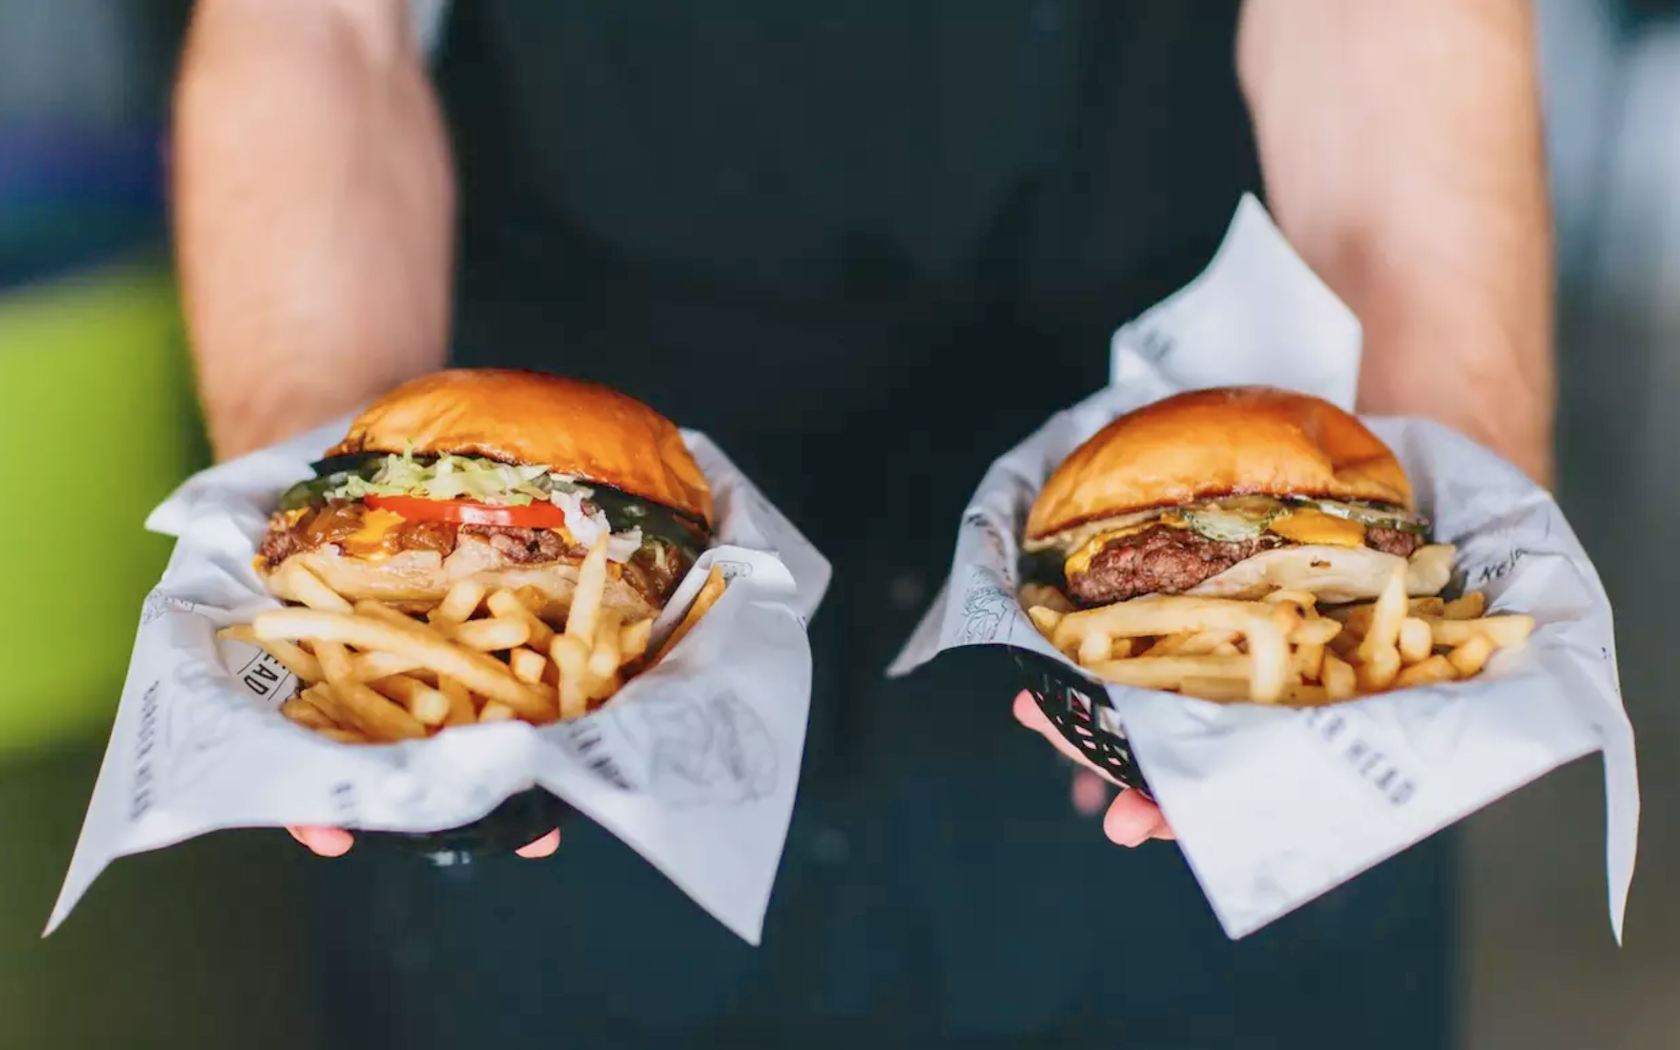 The Burger Expo: A Event Dedicated To Burgers Is Coming To Sydney